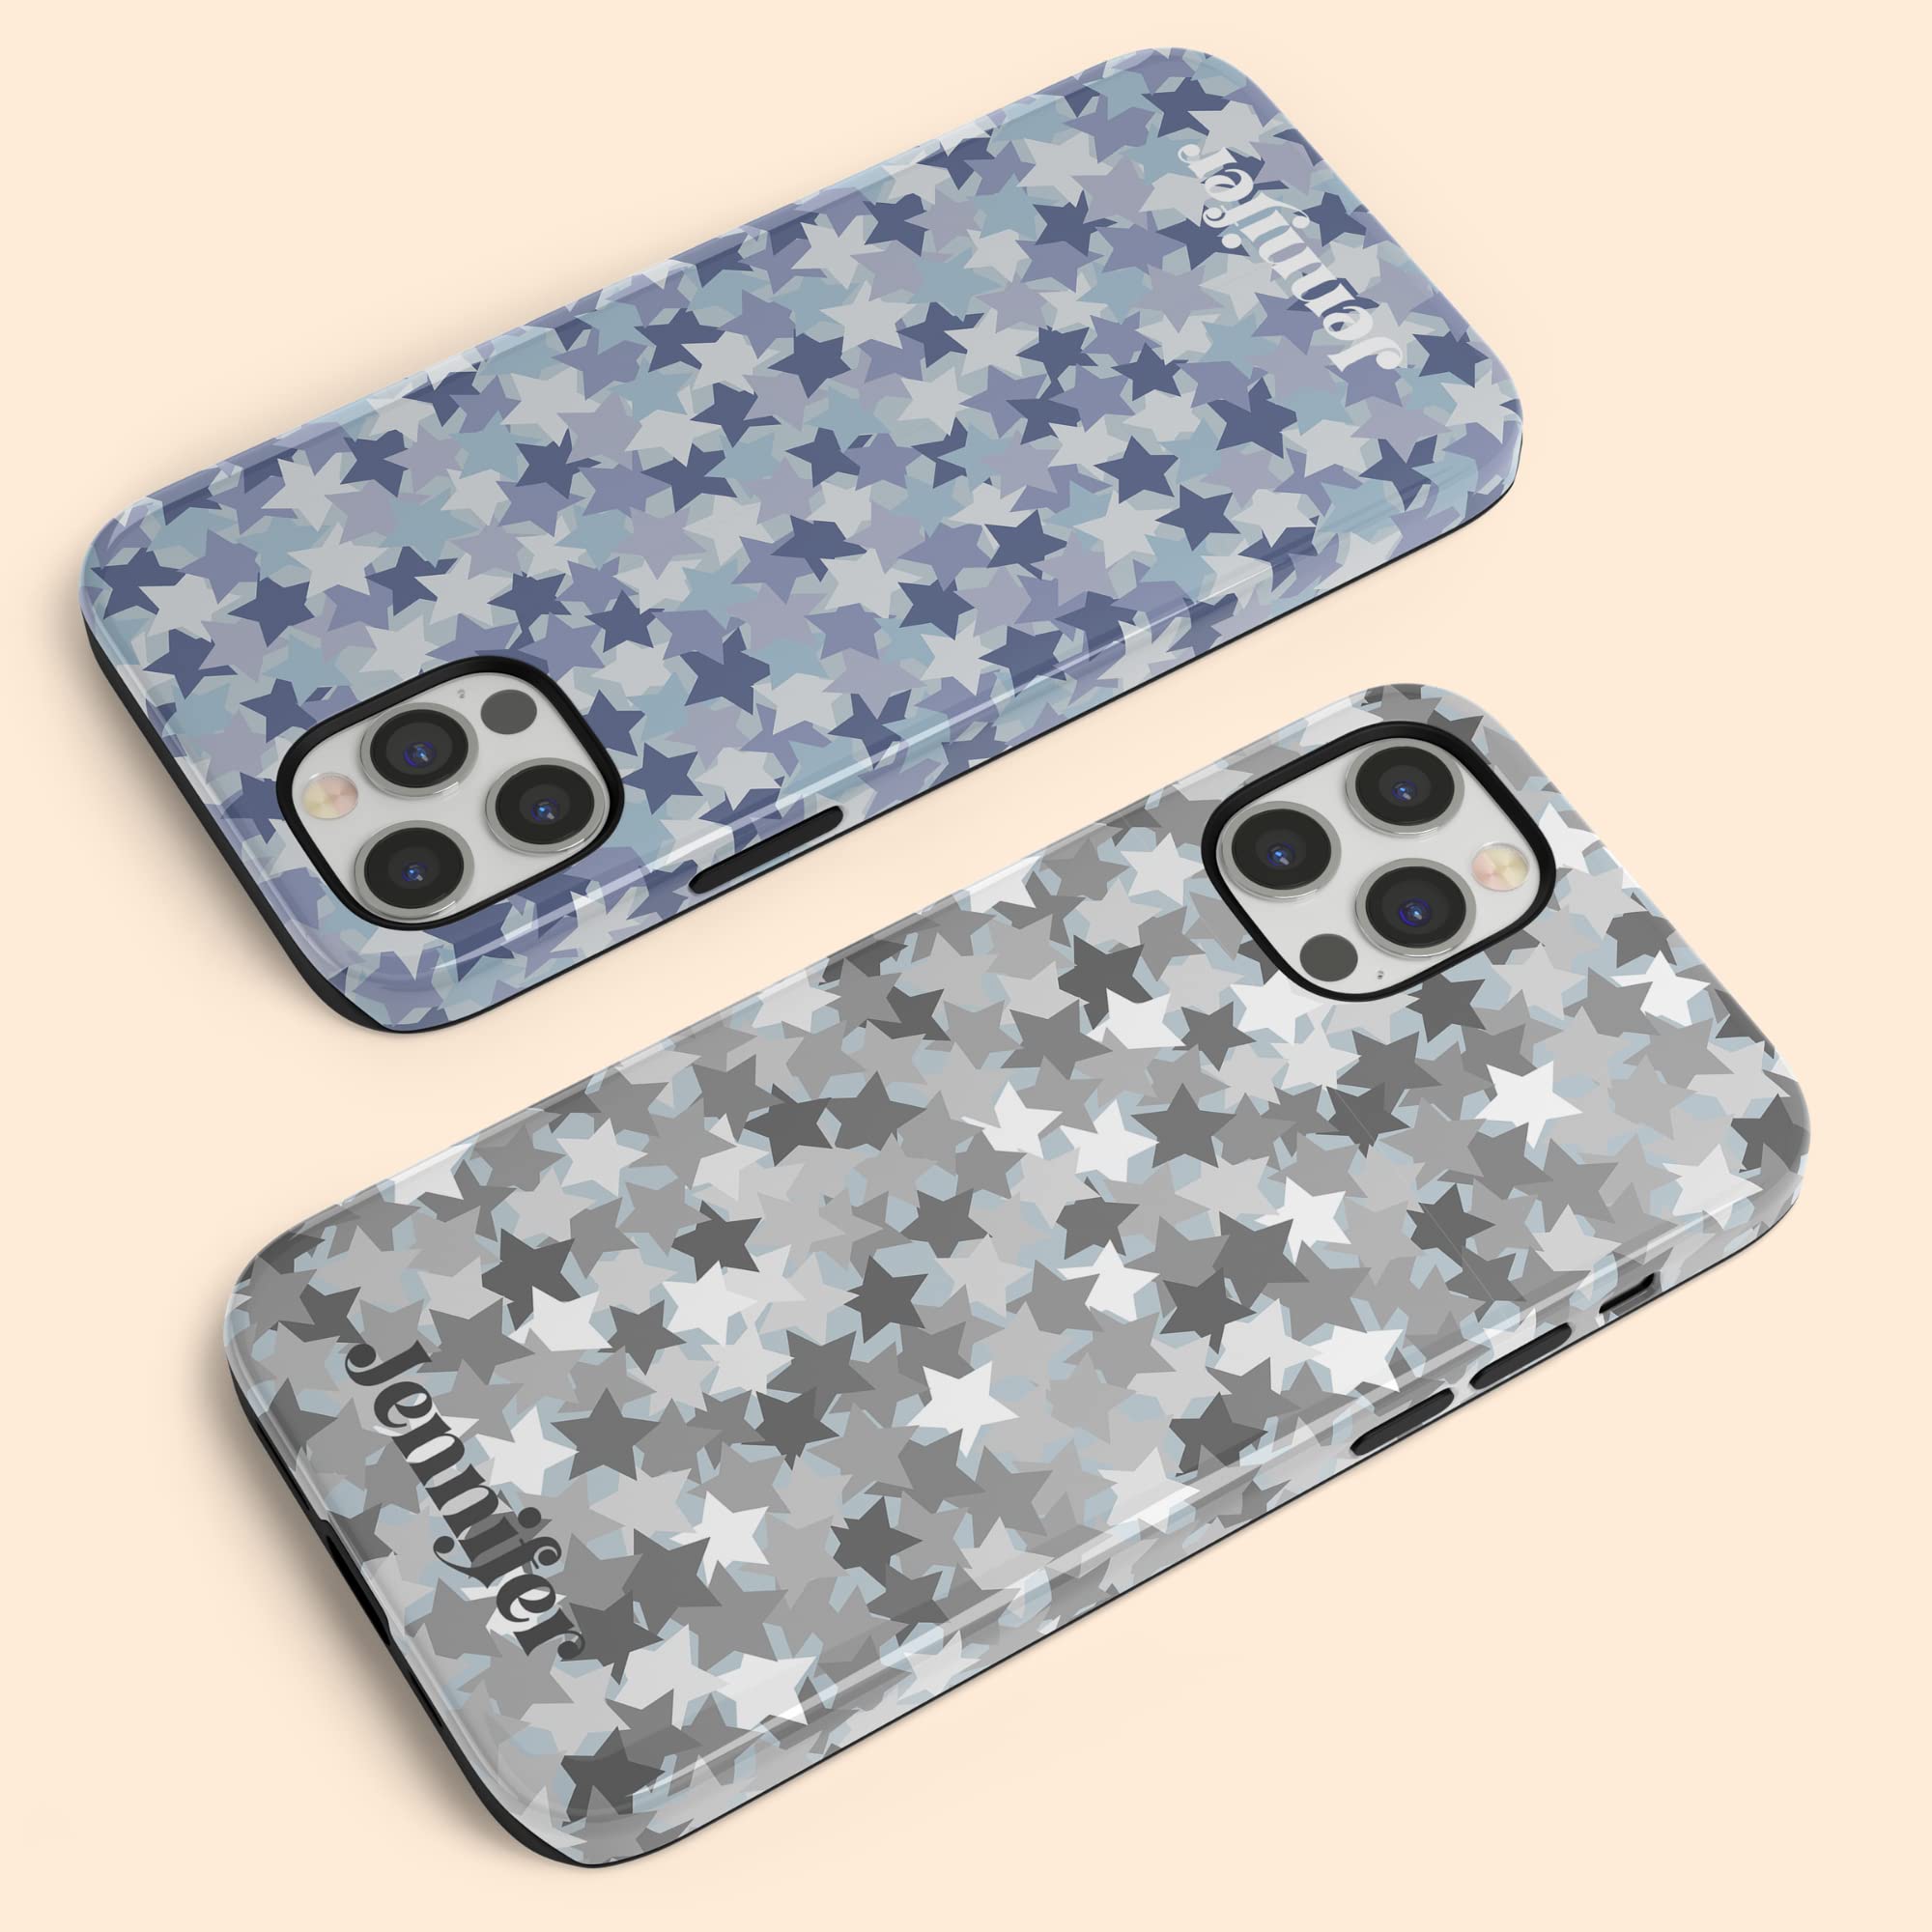 Artisticases Custom Name Stars Camo Case for Women, Personalized Name Case, Designed for iPhone 14 Plus, iPhone 13 Pro Max, iPhone 12 Mini, iPhone 11, iPhone X/XS Max, iPhone ‎XR, iPhone 7/8‎